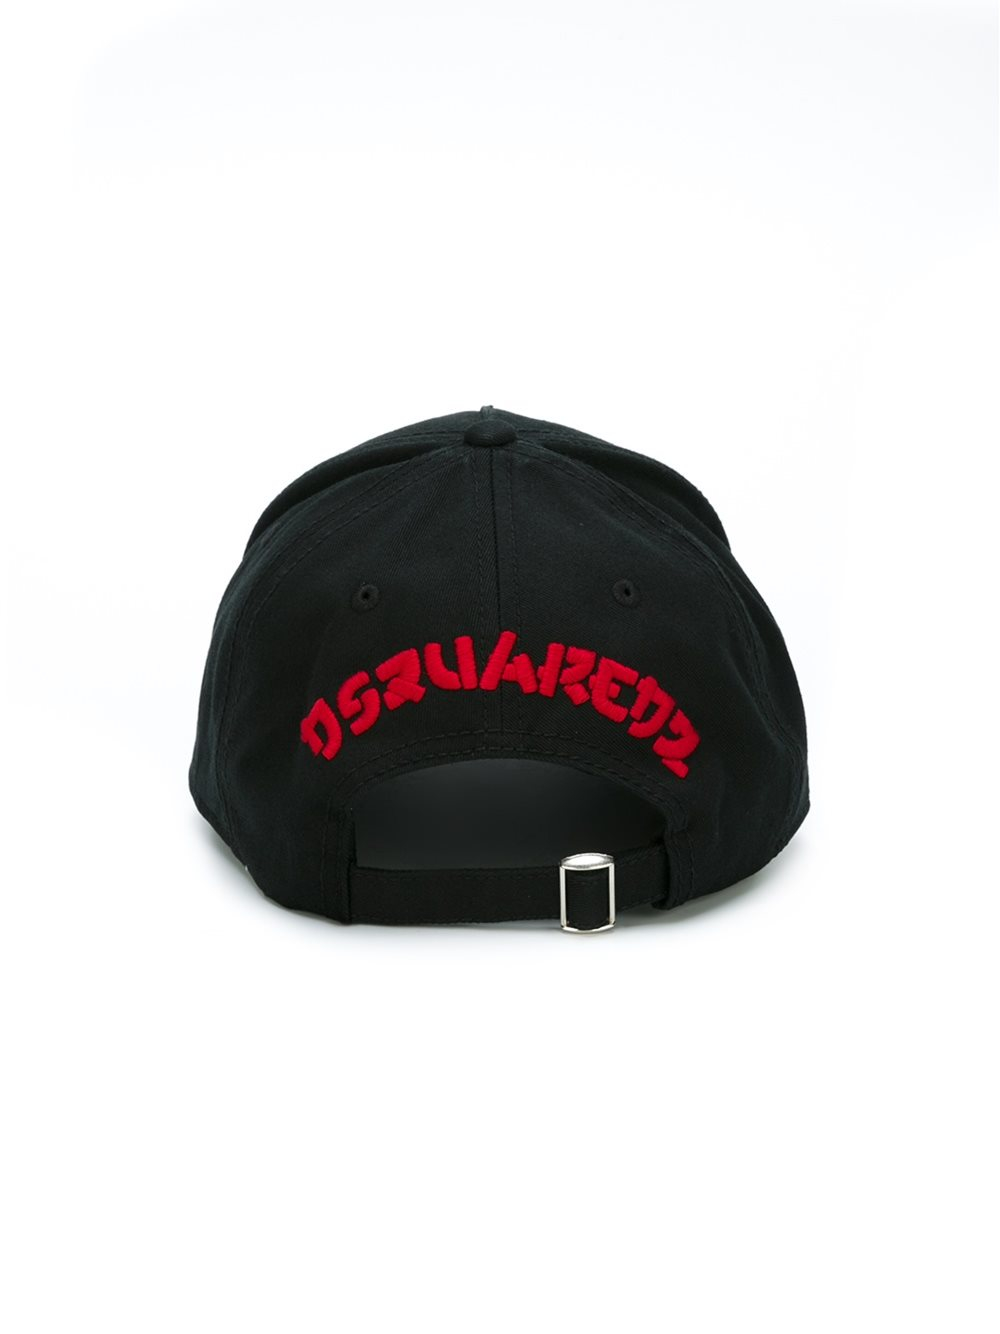 dsquared cap lucky twins